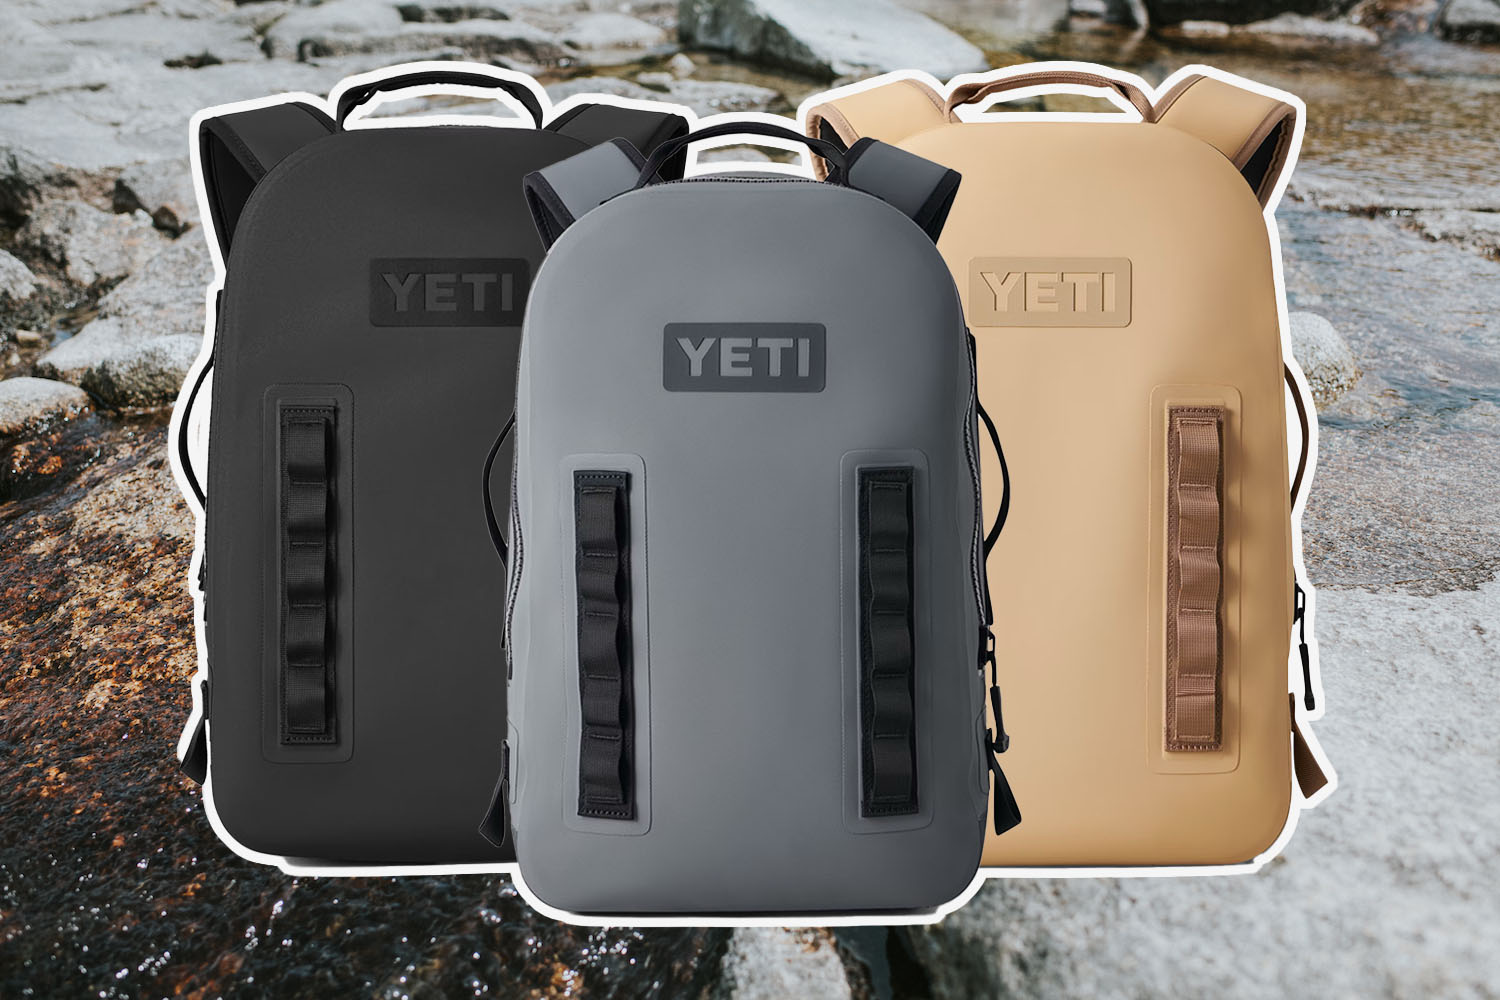 https://www.insidehook.com/wp-content/uploads/2023/11/Yeti-Pagna-Backpack-Review.jpg?fit=1200%2C800